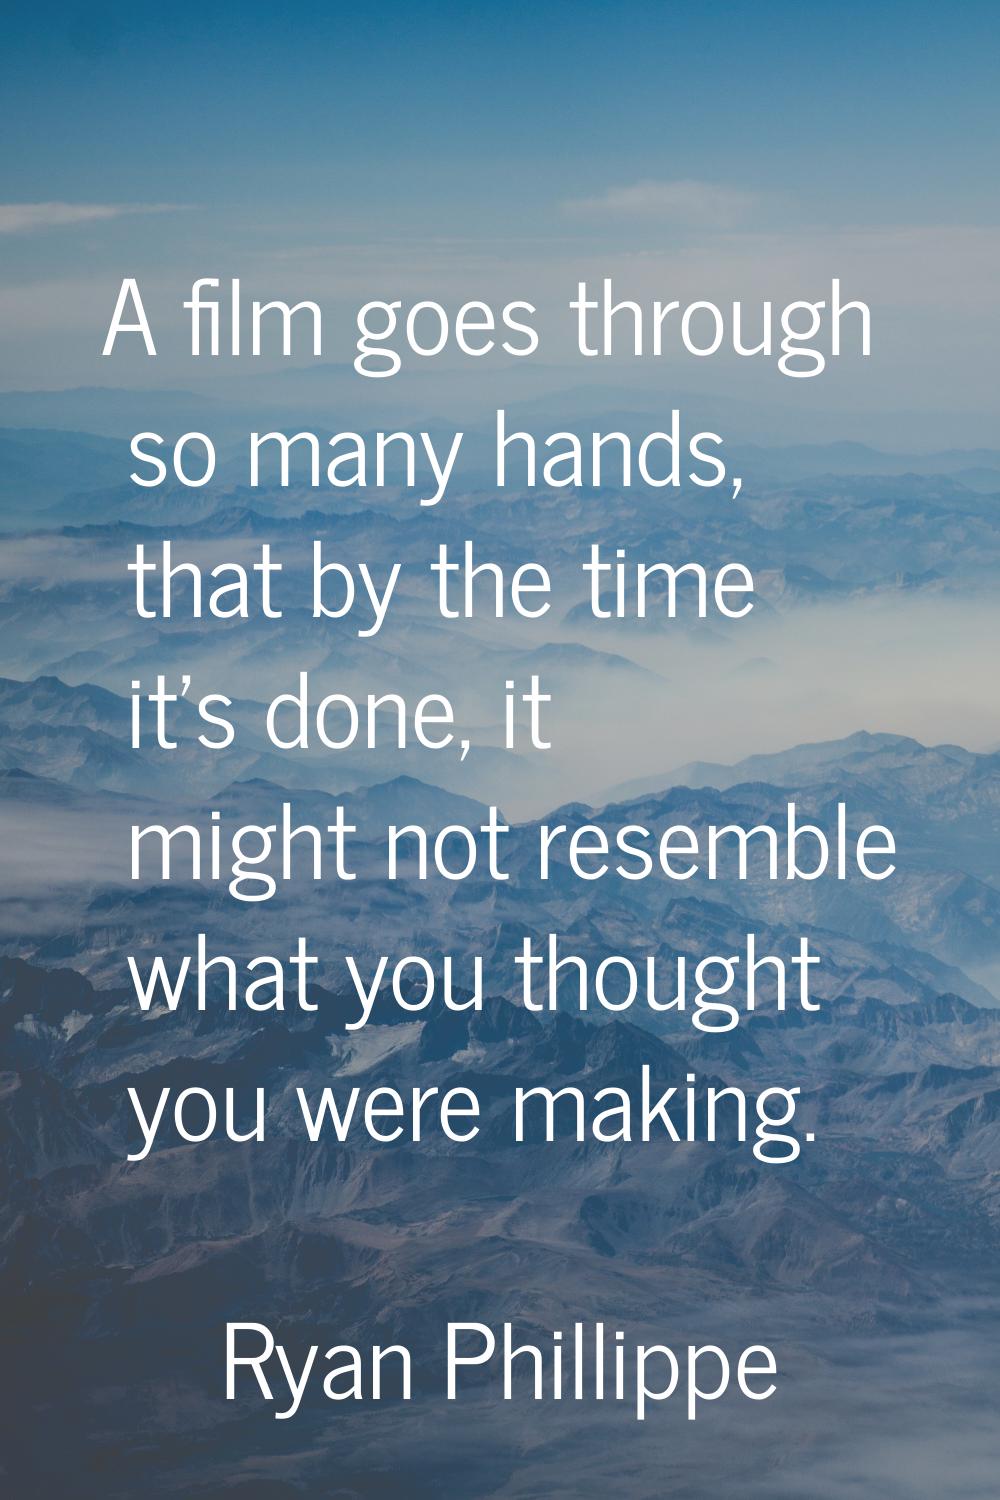 A film goes through so many hands, that by the time it's done, it might not resemble what you thoug